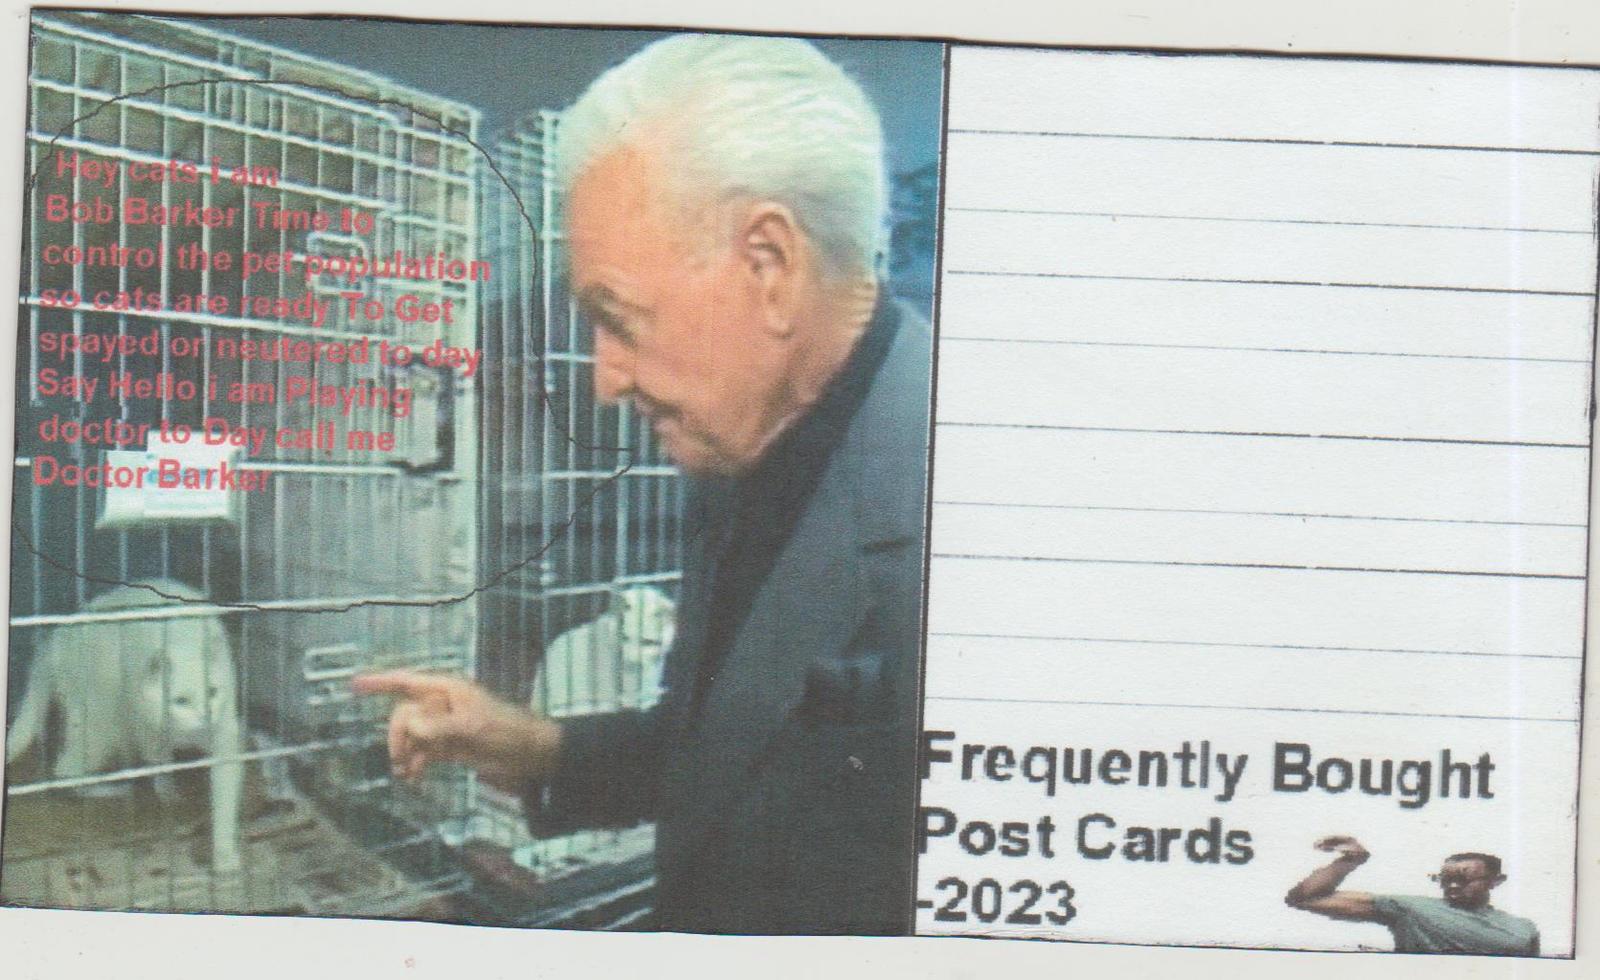 Primary image for 2023 Frequently Bought Post cards Price is Right Bob Barker Doctor Barker is in.